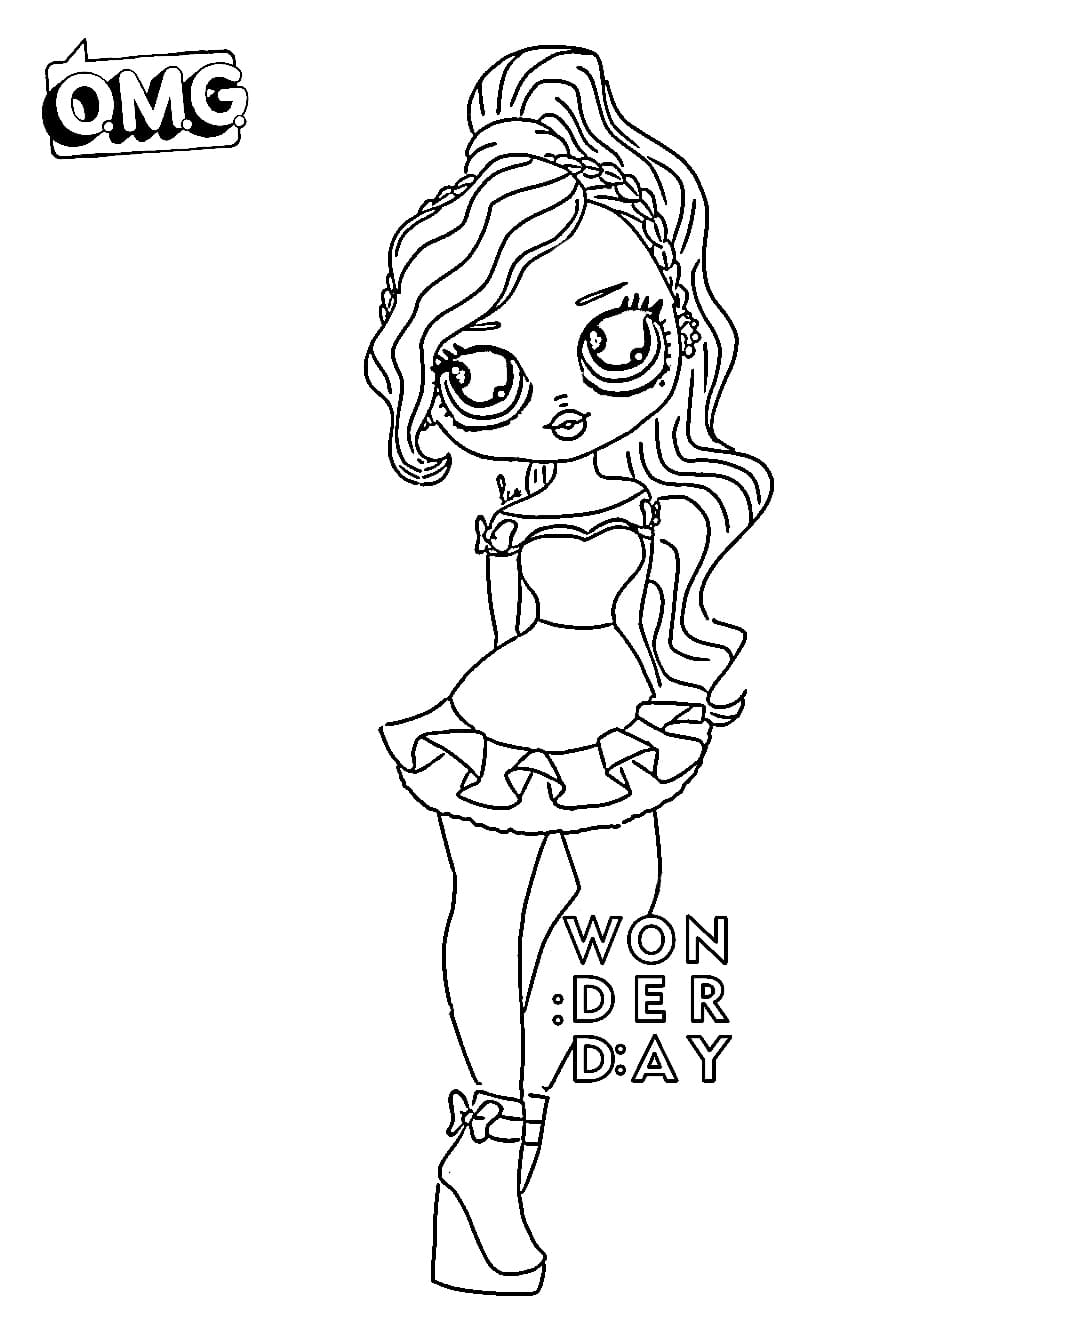 lol omg purr baby coloring pages printable free printable lol omg